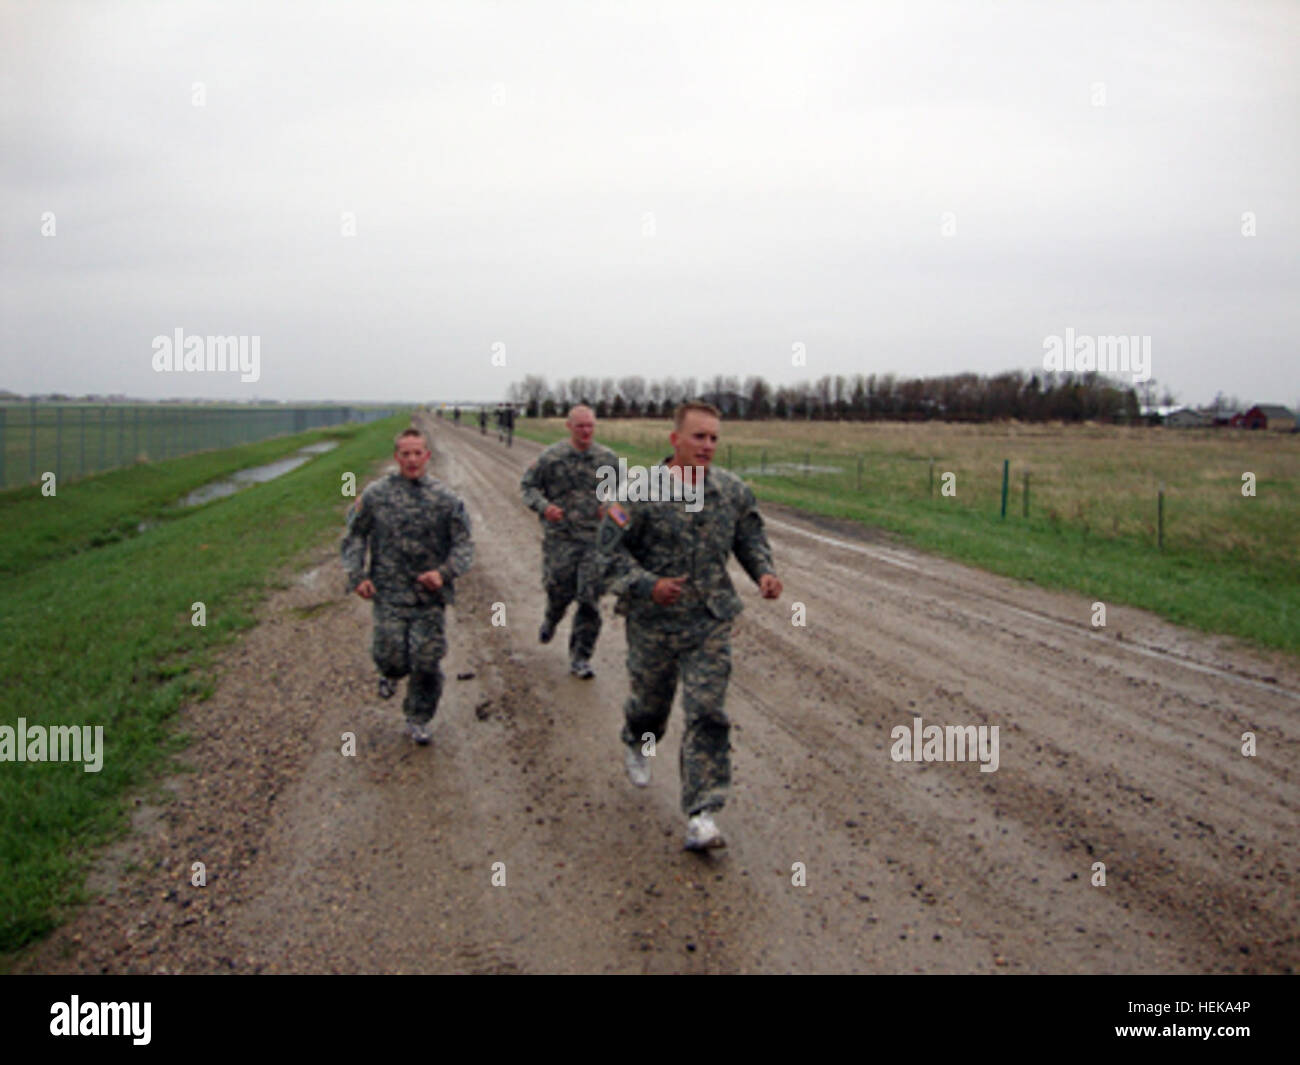 Pfc. John Thorenson II, of Fessenden, N.D., pulls ahead of Spc. Scott Jenson, of East Grand Forks, Minn., and Spc. Andrew Swiontek, of Fargo, N.D., during a two-mile run on May 14 near the Fargo Armed Forces Reserve Center. The Soldiers serve in the North Dakota National Guard’s 191st Military Police Company and took part in tryouts for a chance to attend Air Assault school. (Photo by Spc. Daniel Carpenter) ND Soldiers Challenge Selves to Qualify for Air Assault School 403705 Stock Photo